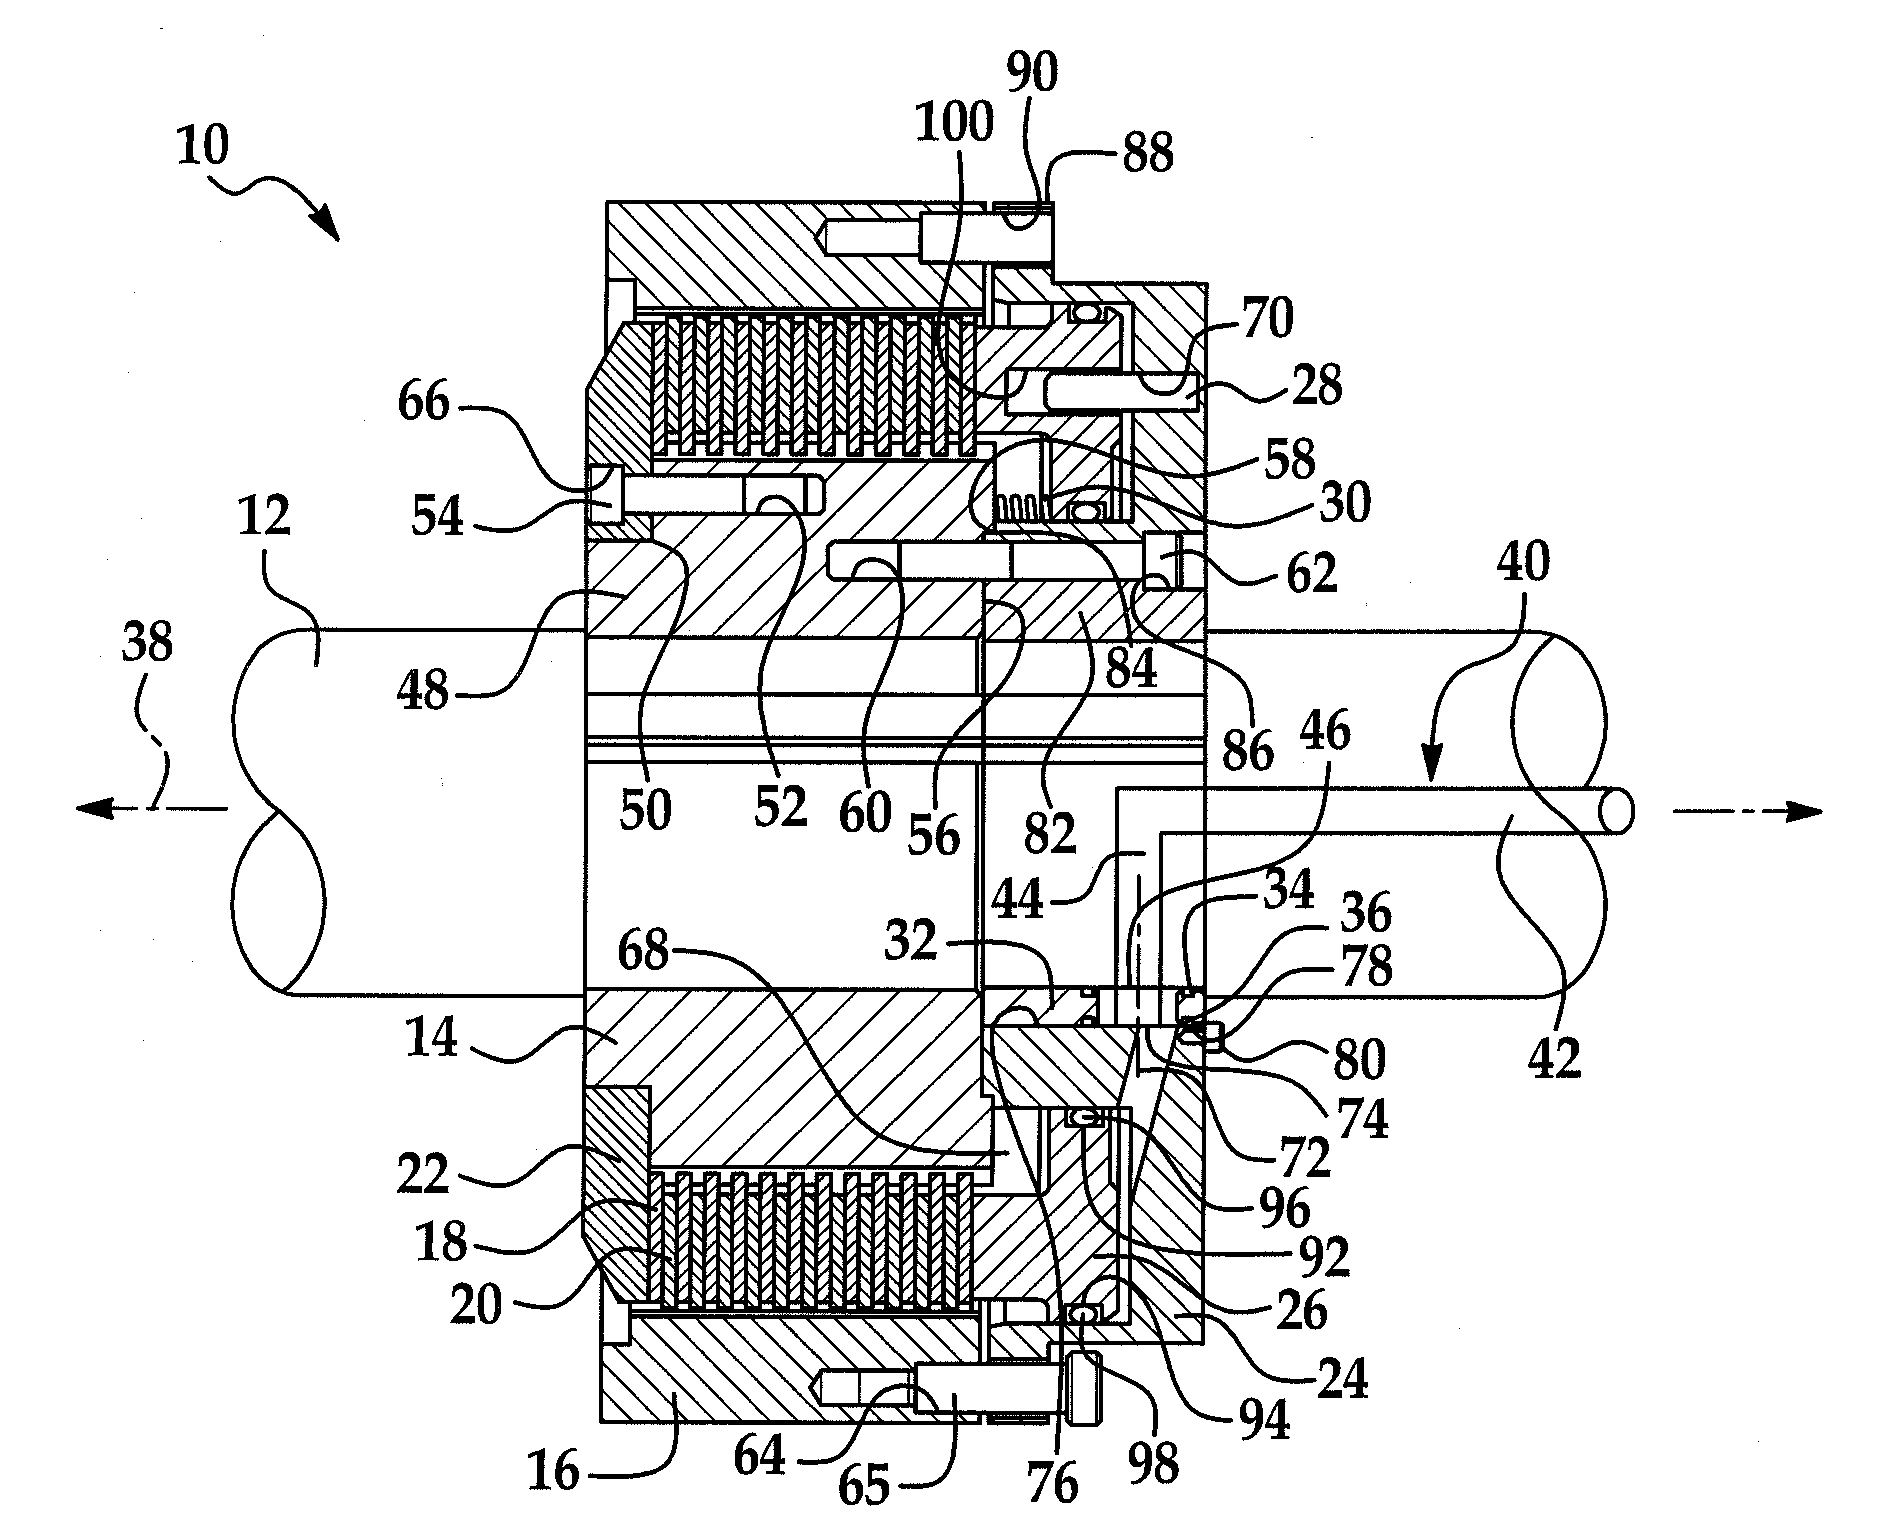 Rotational coupling device with sealed key